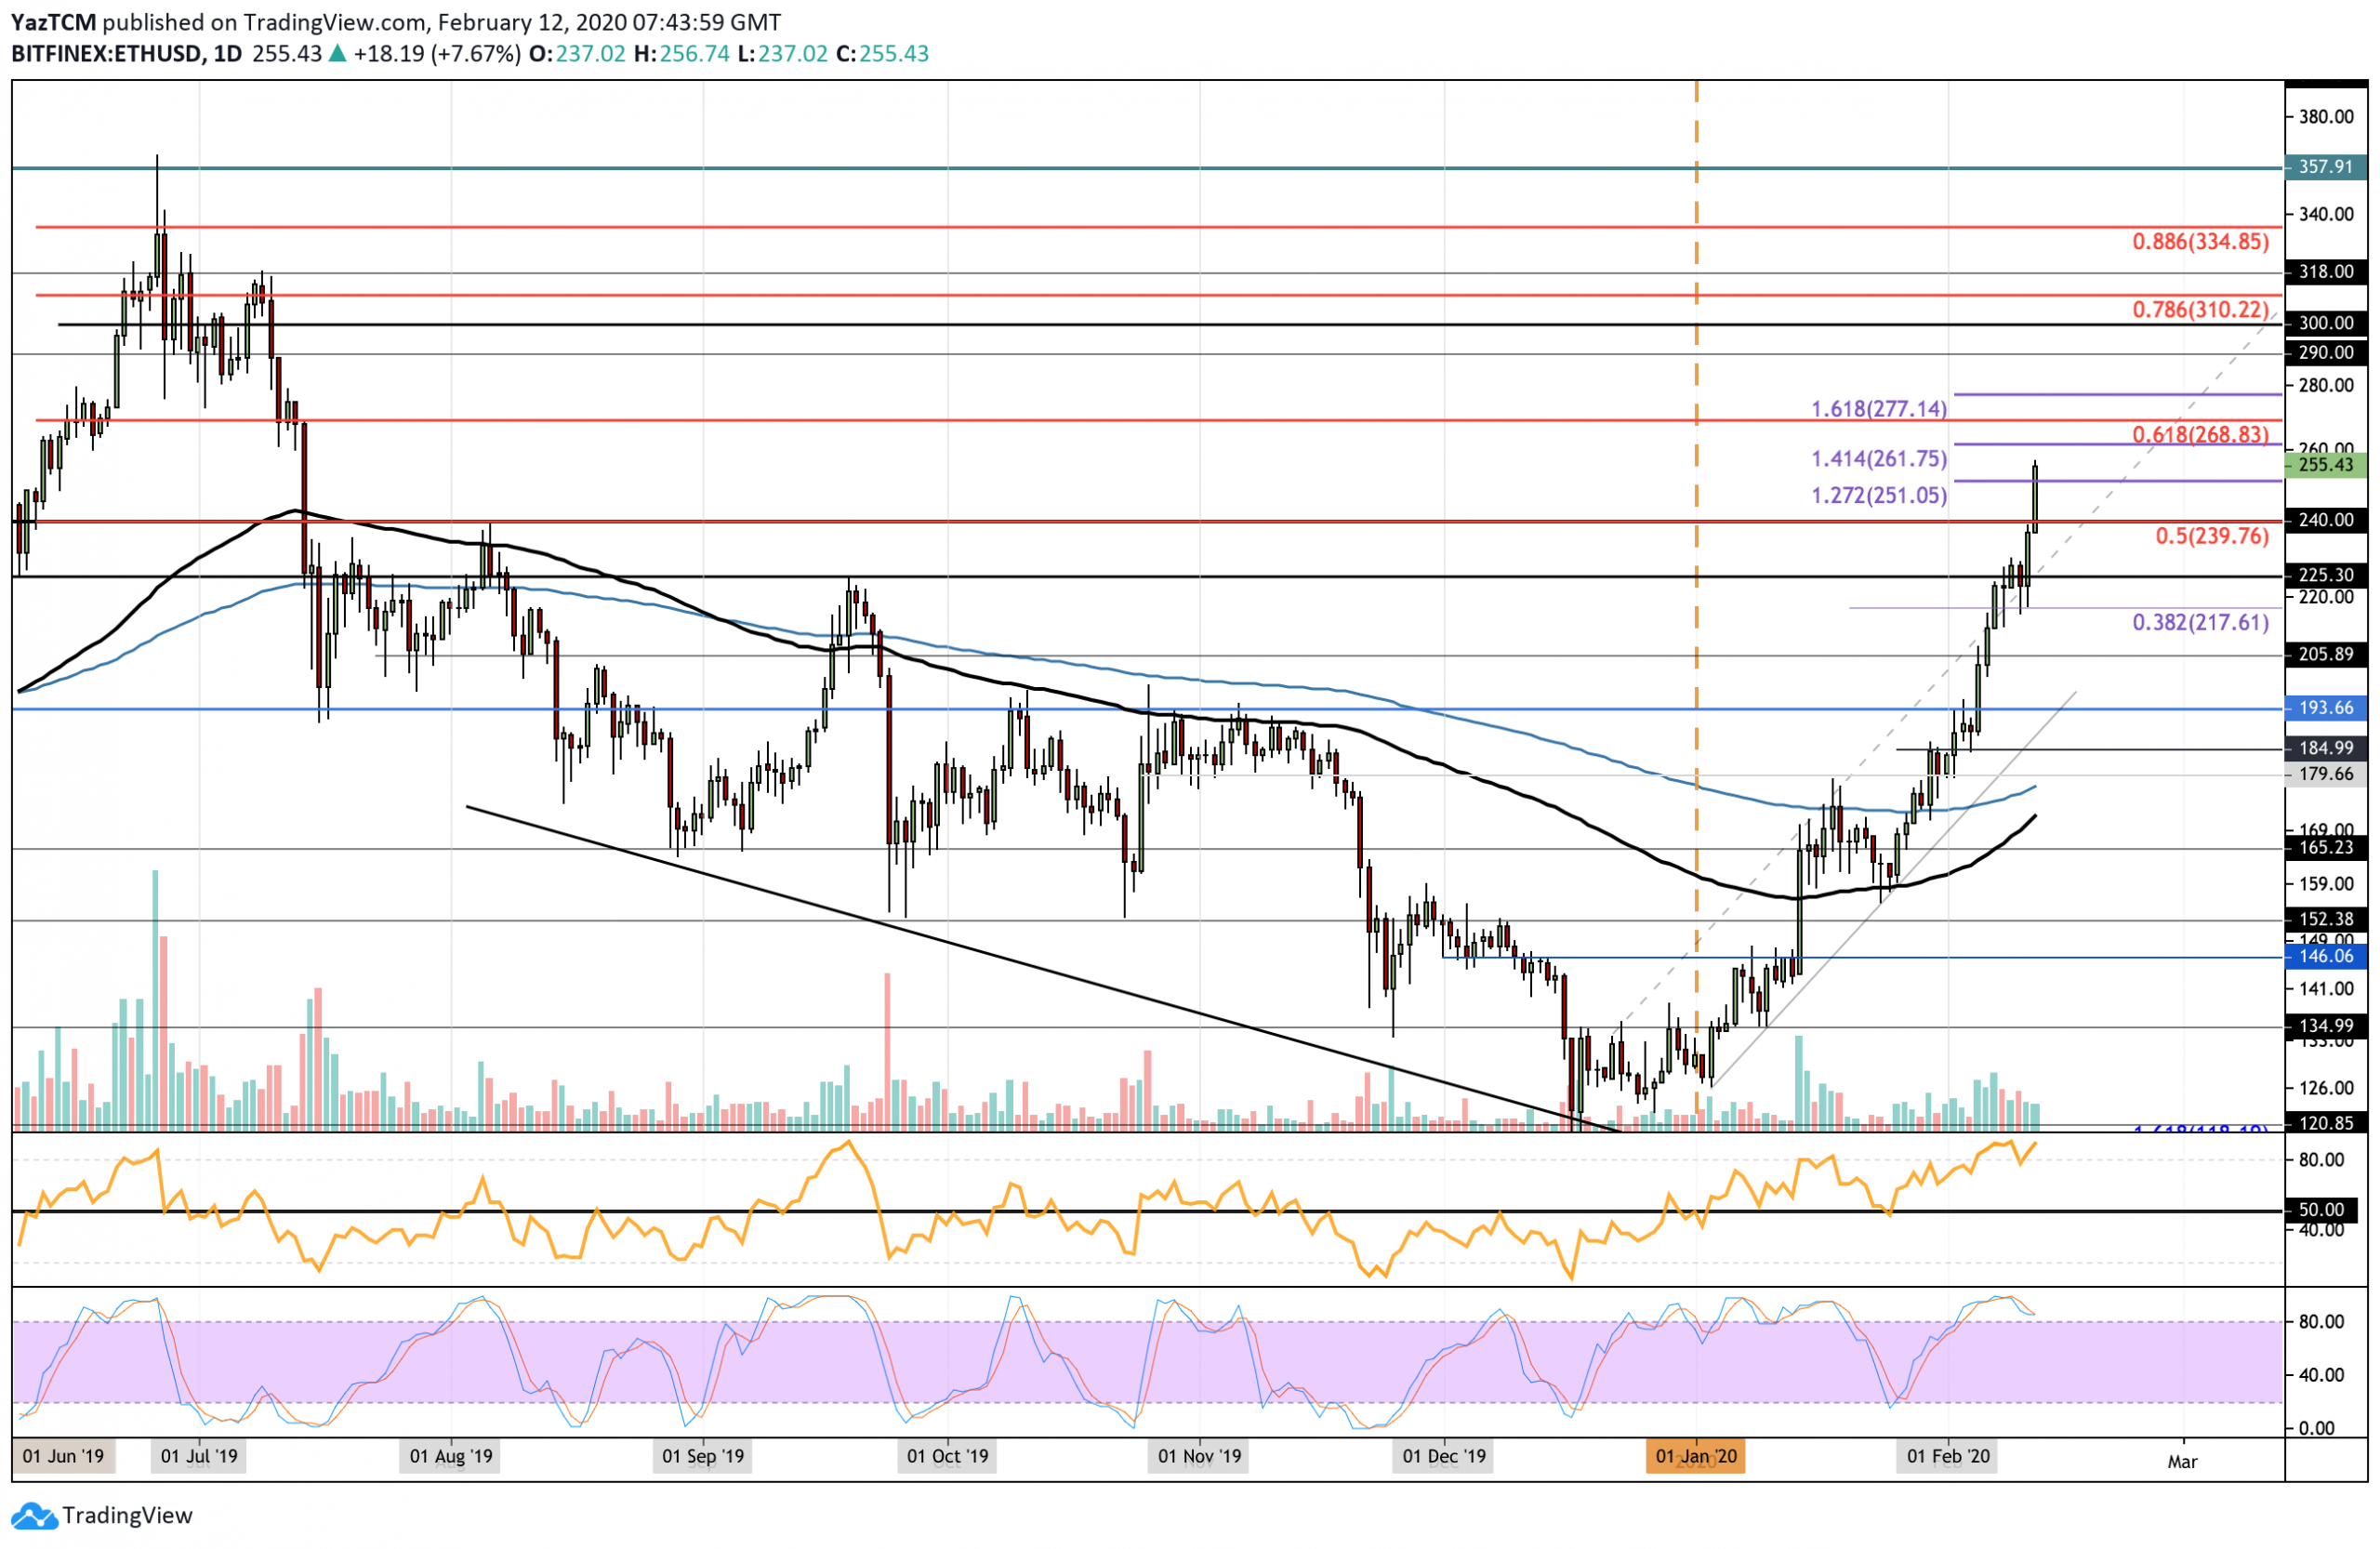 Ethereum Price Analysis: ETH Skyrockets To $255 Overnight To Complete 90% Gains In 2020